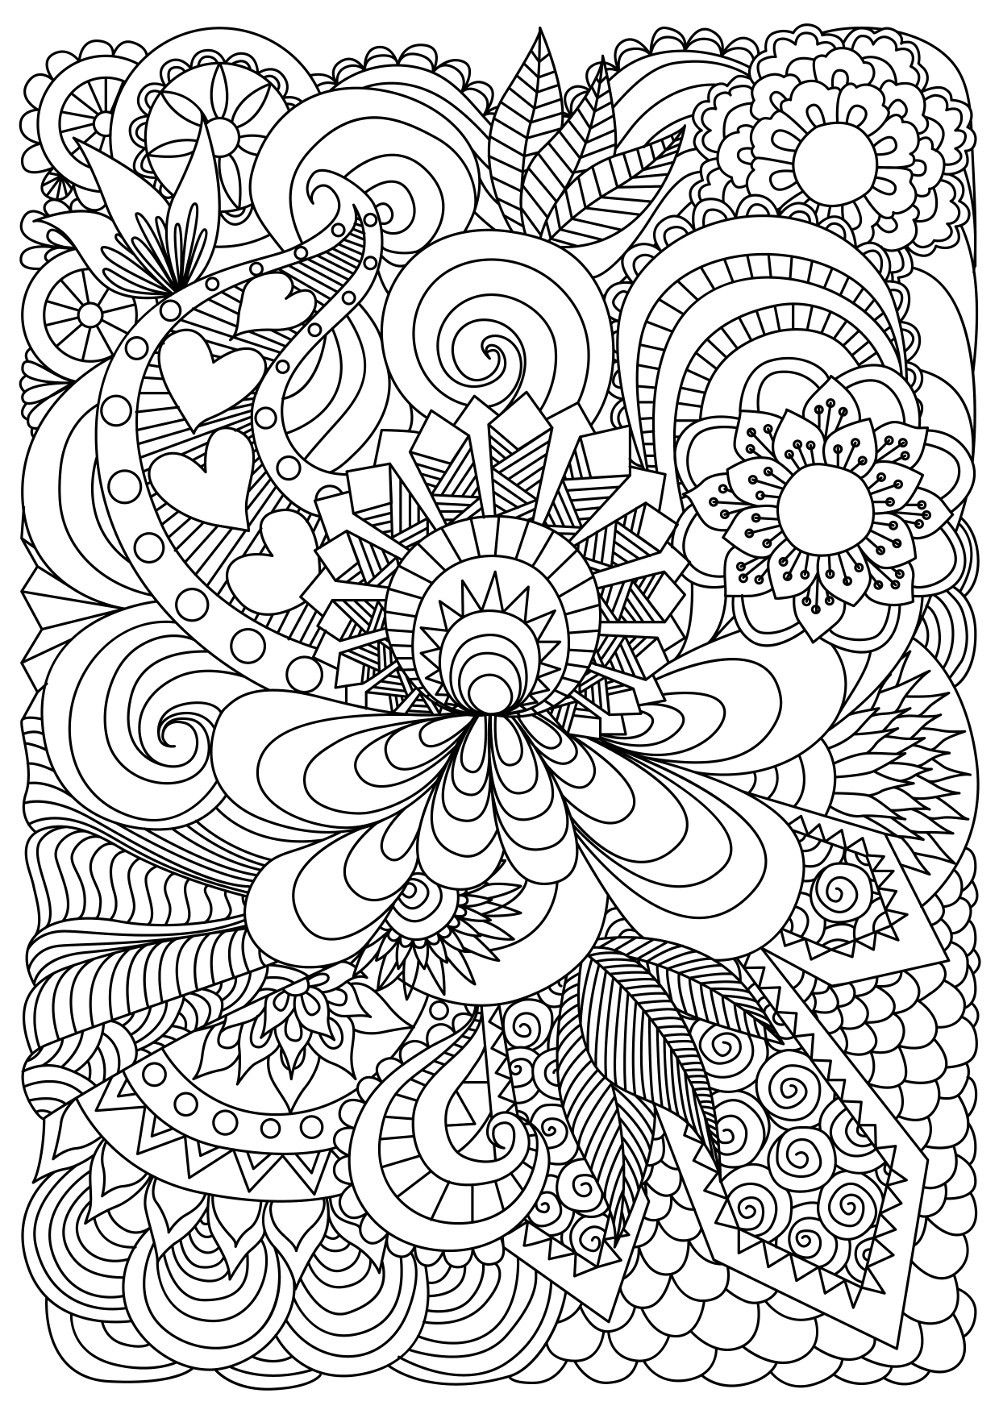 Coloring Pages For Adults Online
 37 Best Adults Coloring Pages Updated 2018